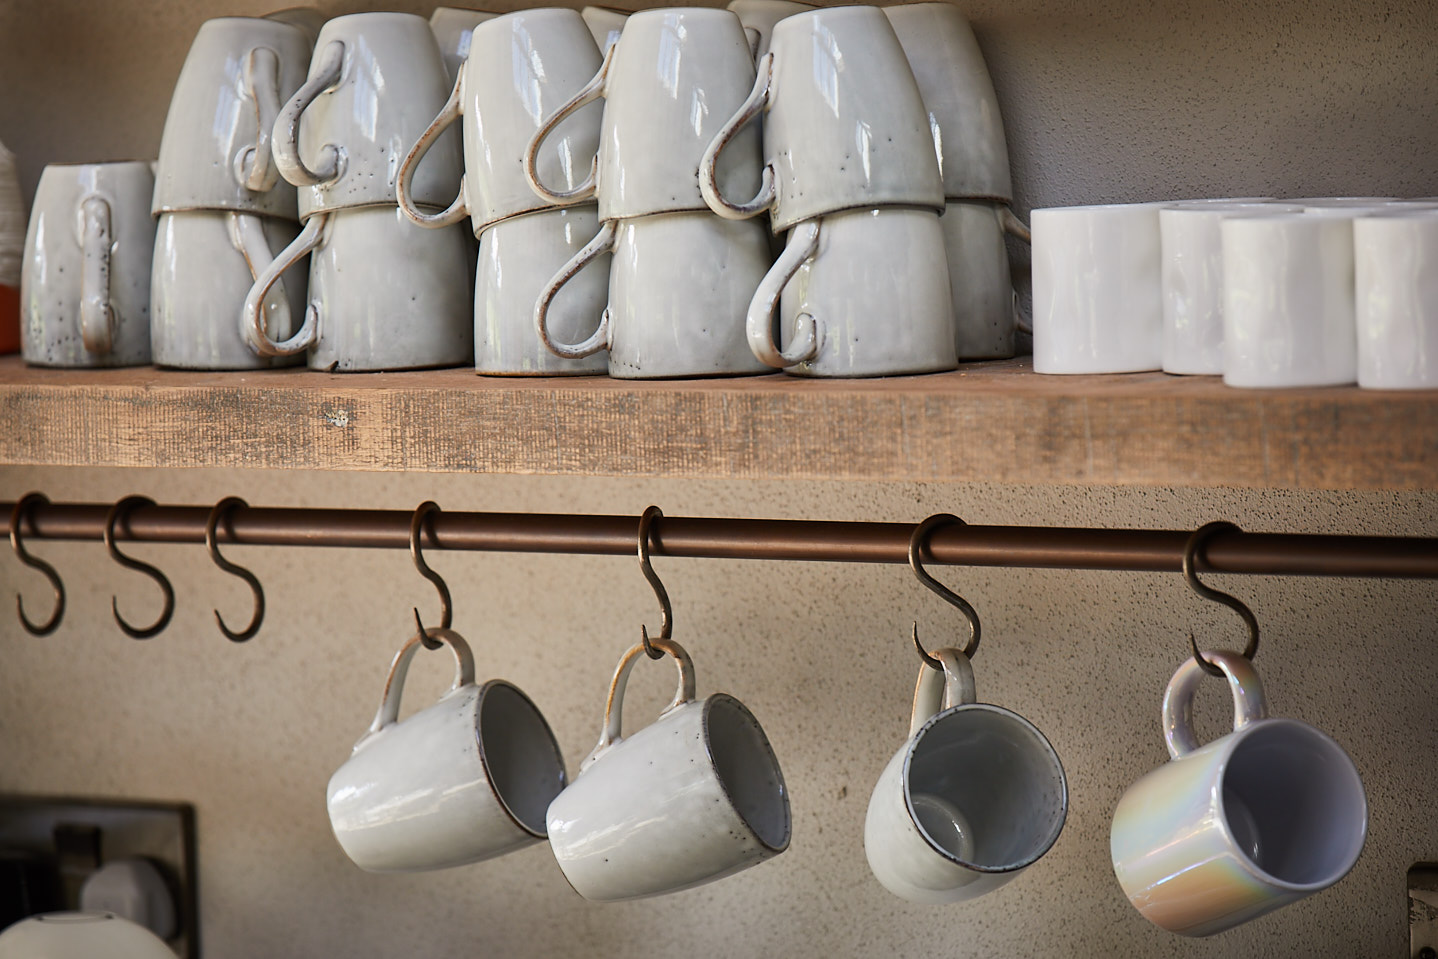 Engineered rustic shelf with white mugs and hanging rail with little metal hooks